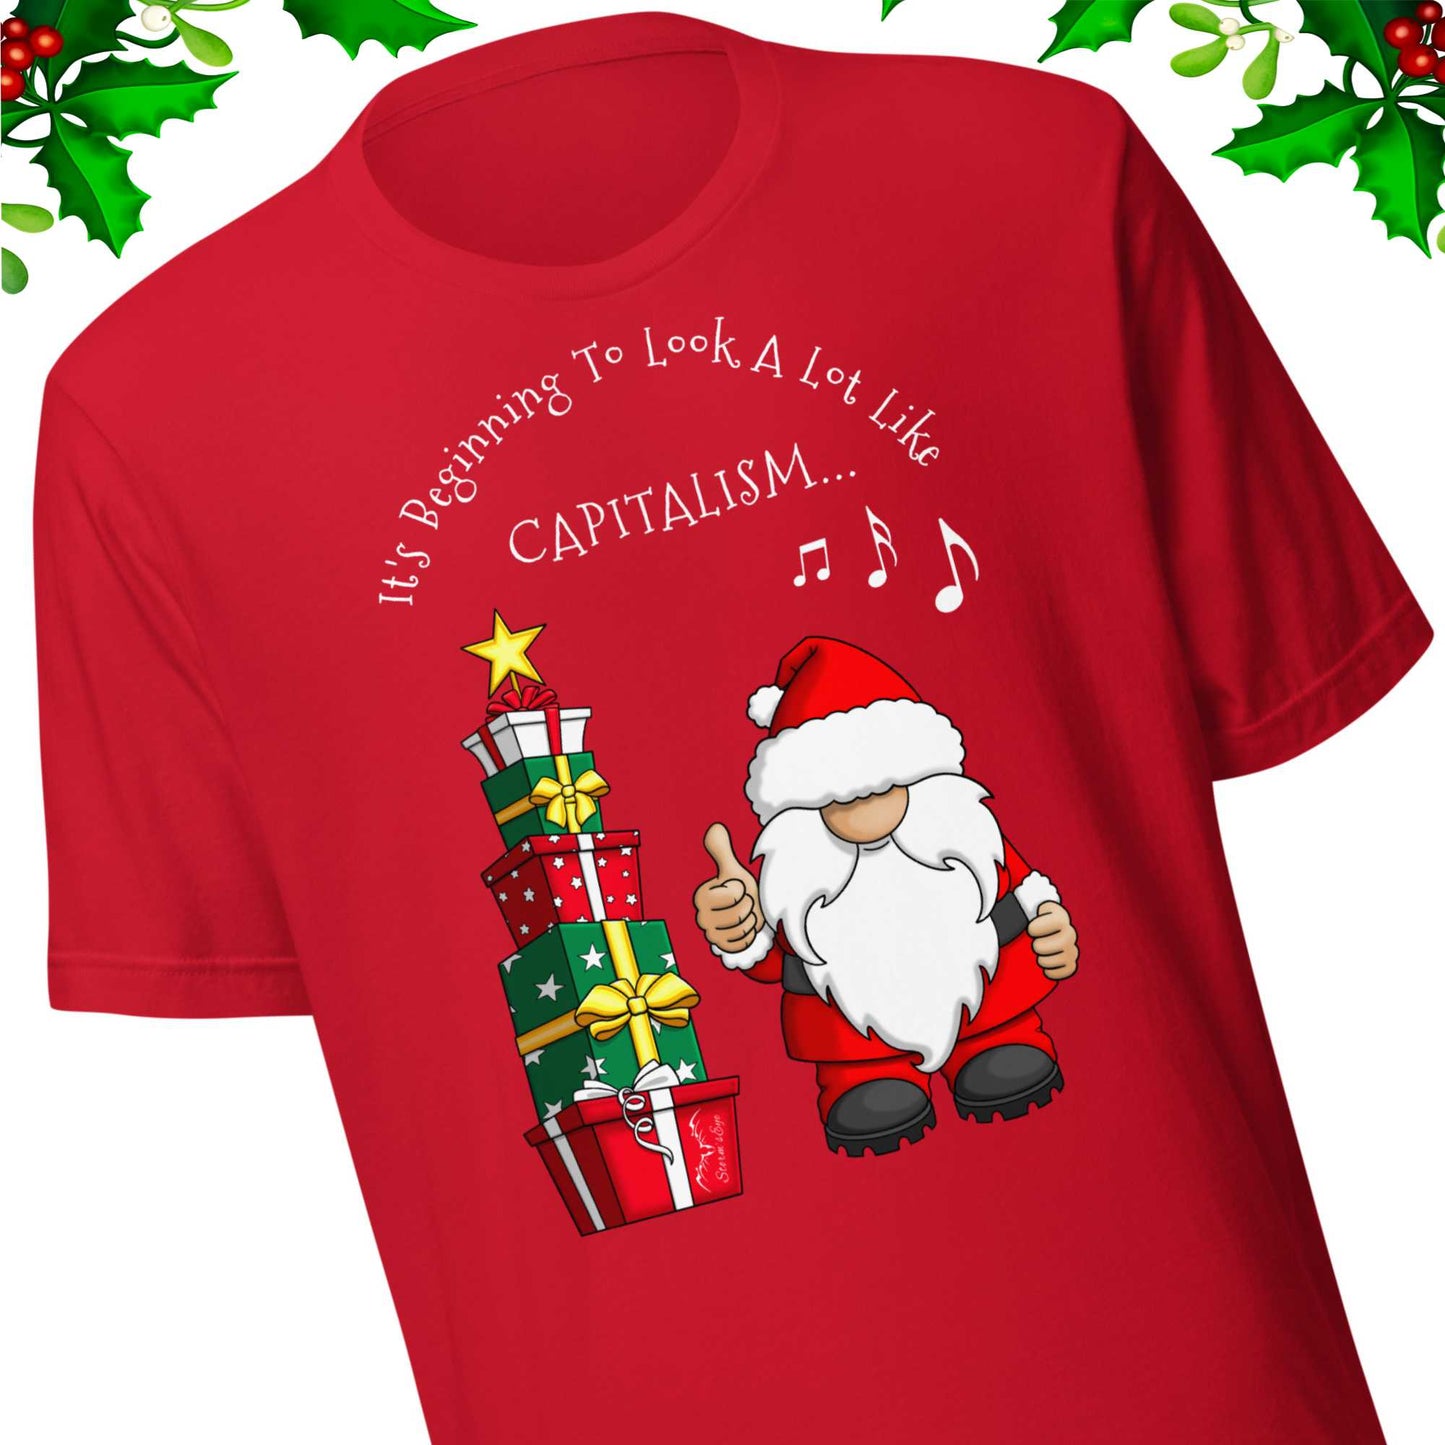 stormseye design festive capitalism christmas T shirt, detail view bright red